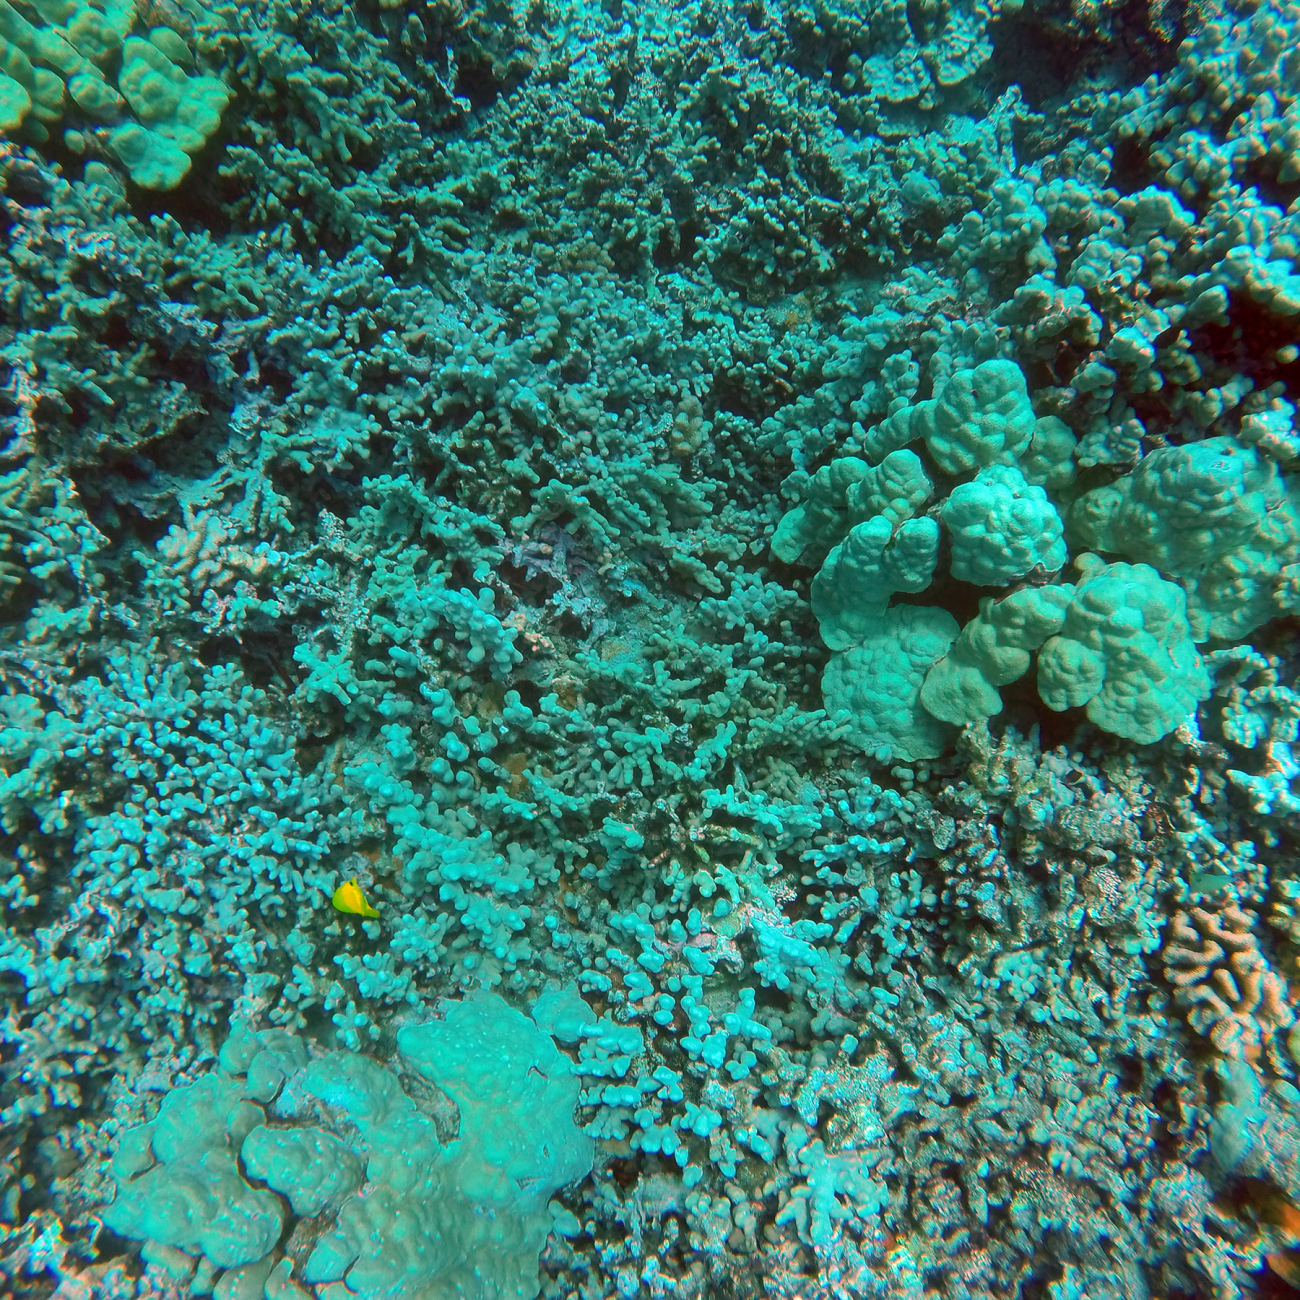 A coral reef with the long thin branches of Porites compressa coral that oftenhost numerous reef fish